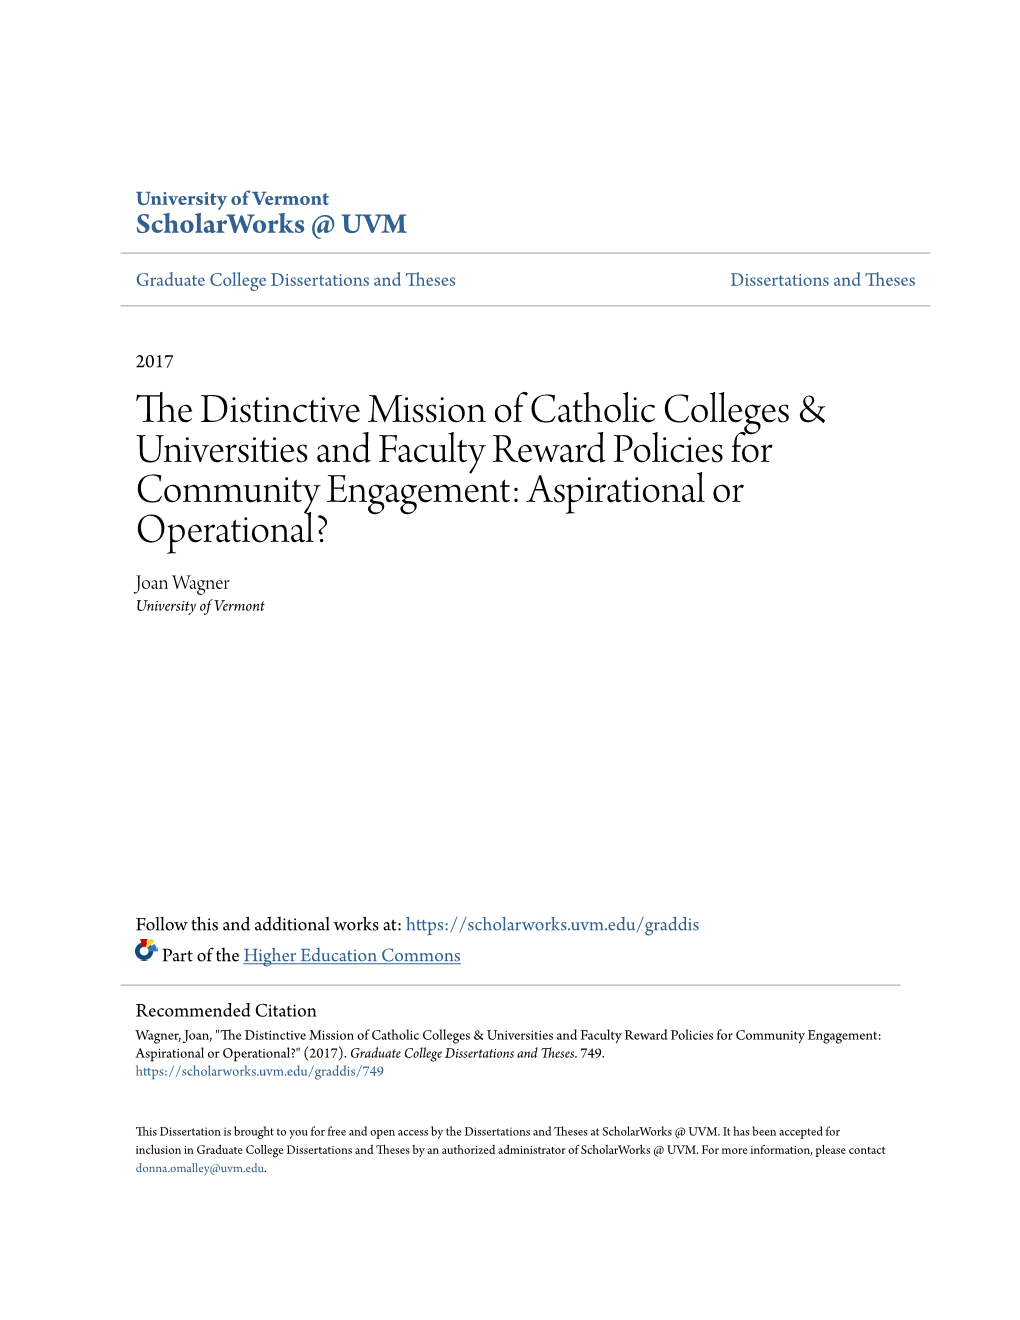 The Distinctive Mission of Catholic Colleges & Universities and Faculty Reward Policies for Community Engagement